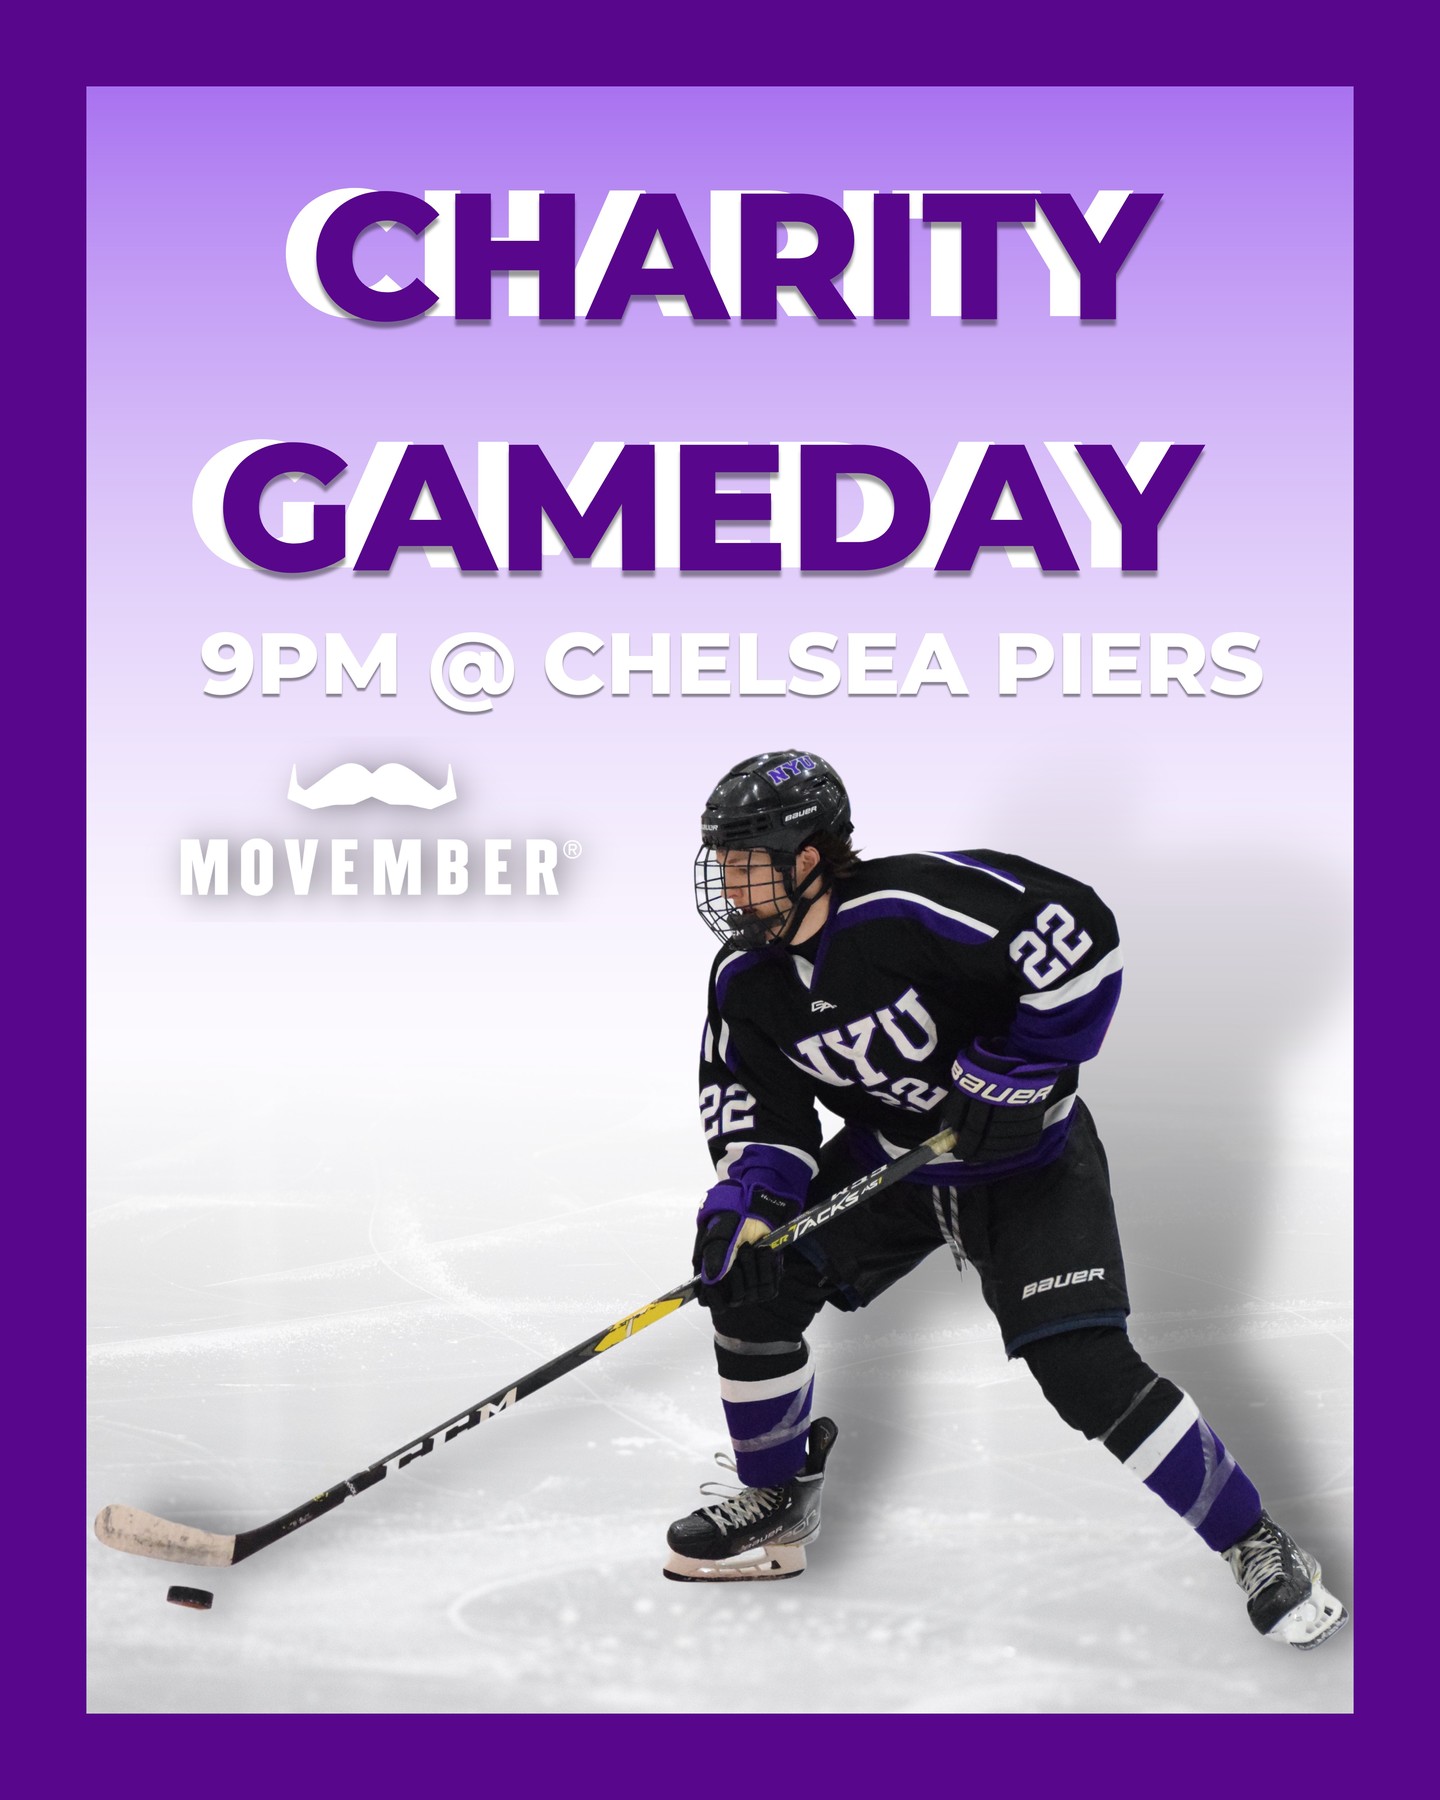 IT'S CHARITY GAMEDAY!!

Tonight the Violets take on the Stony Brook Seawolves at 9PM at Chelsea Piers. 

Special raffles will be held for Movember Merch (see our Movember Merch post for more information). 

Admission is free but we will be accepting donations towards our Movember team goal of $5,000! Link in bio to donate online as well. 

#movember #nyuathletics #achahockey #movemberfoundation